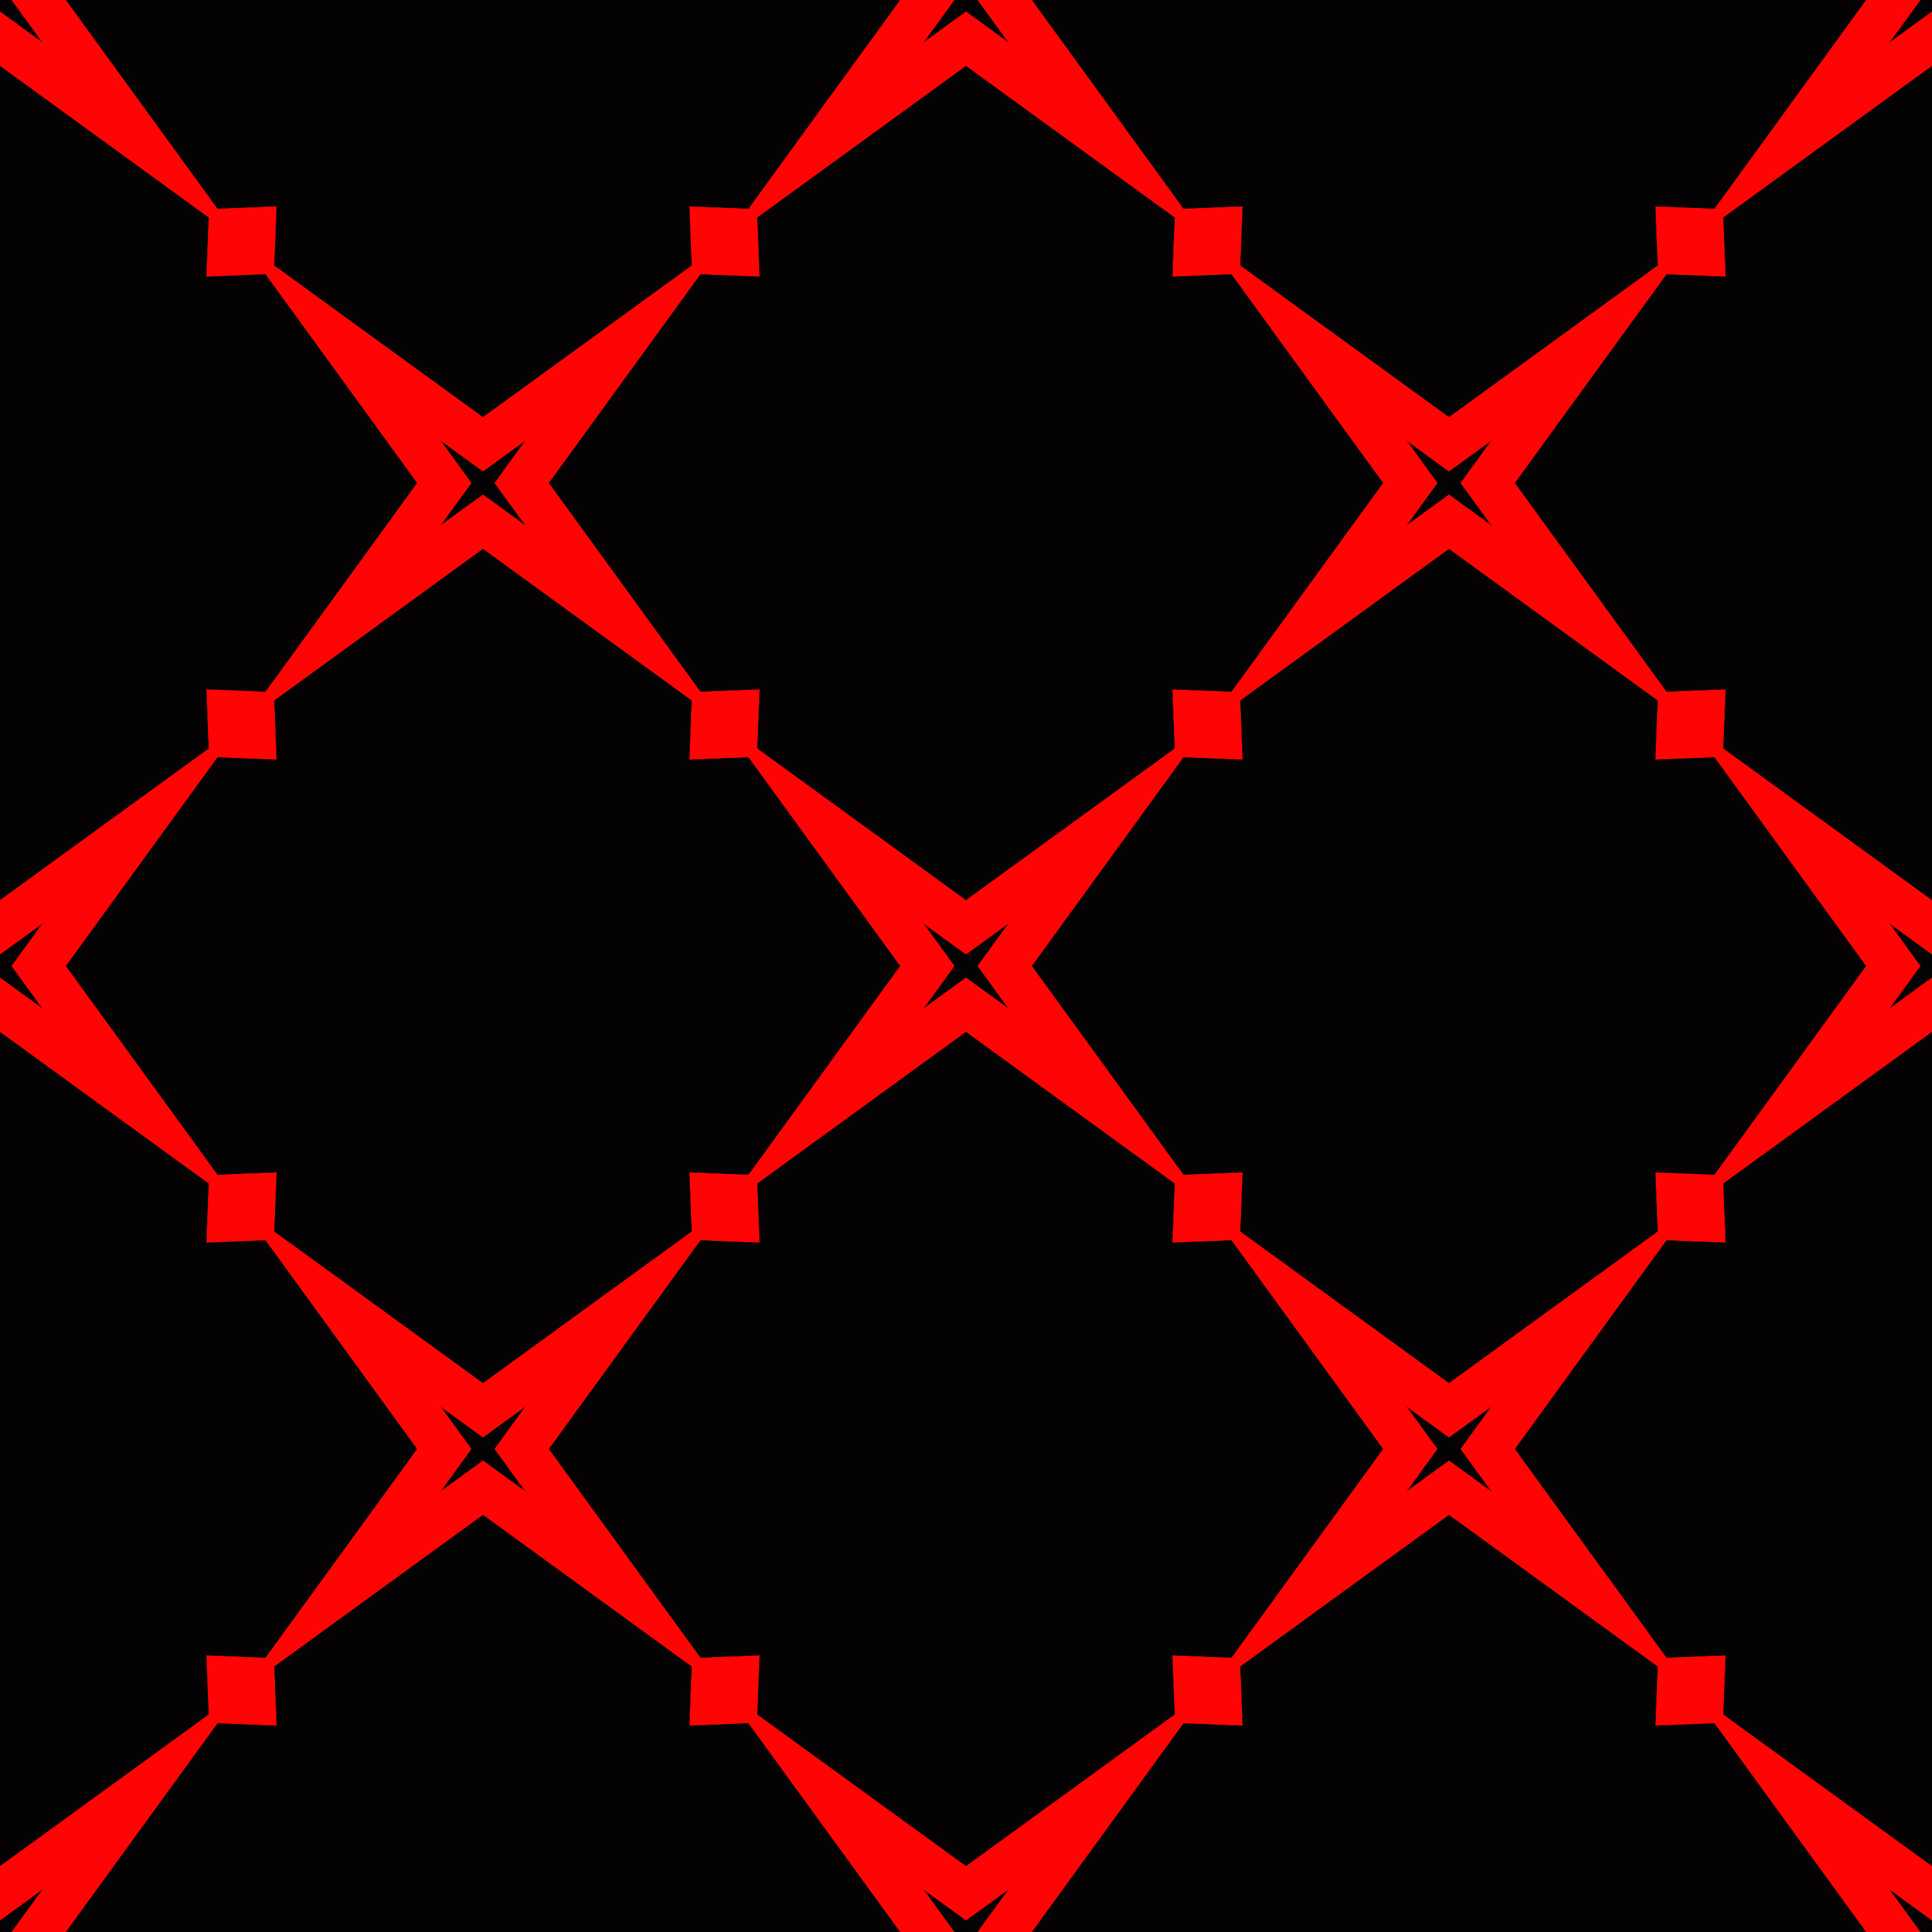 Red Vertical Background